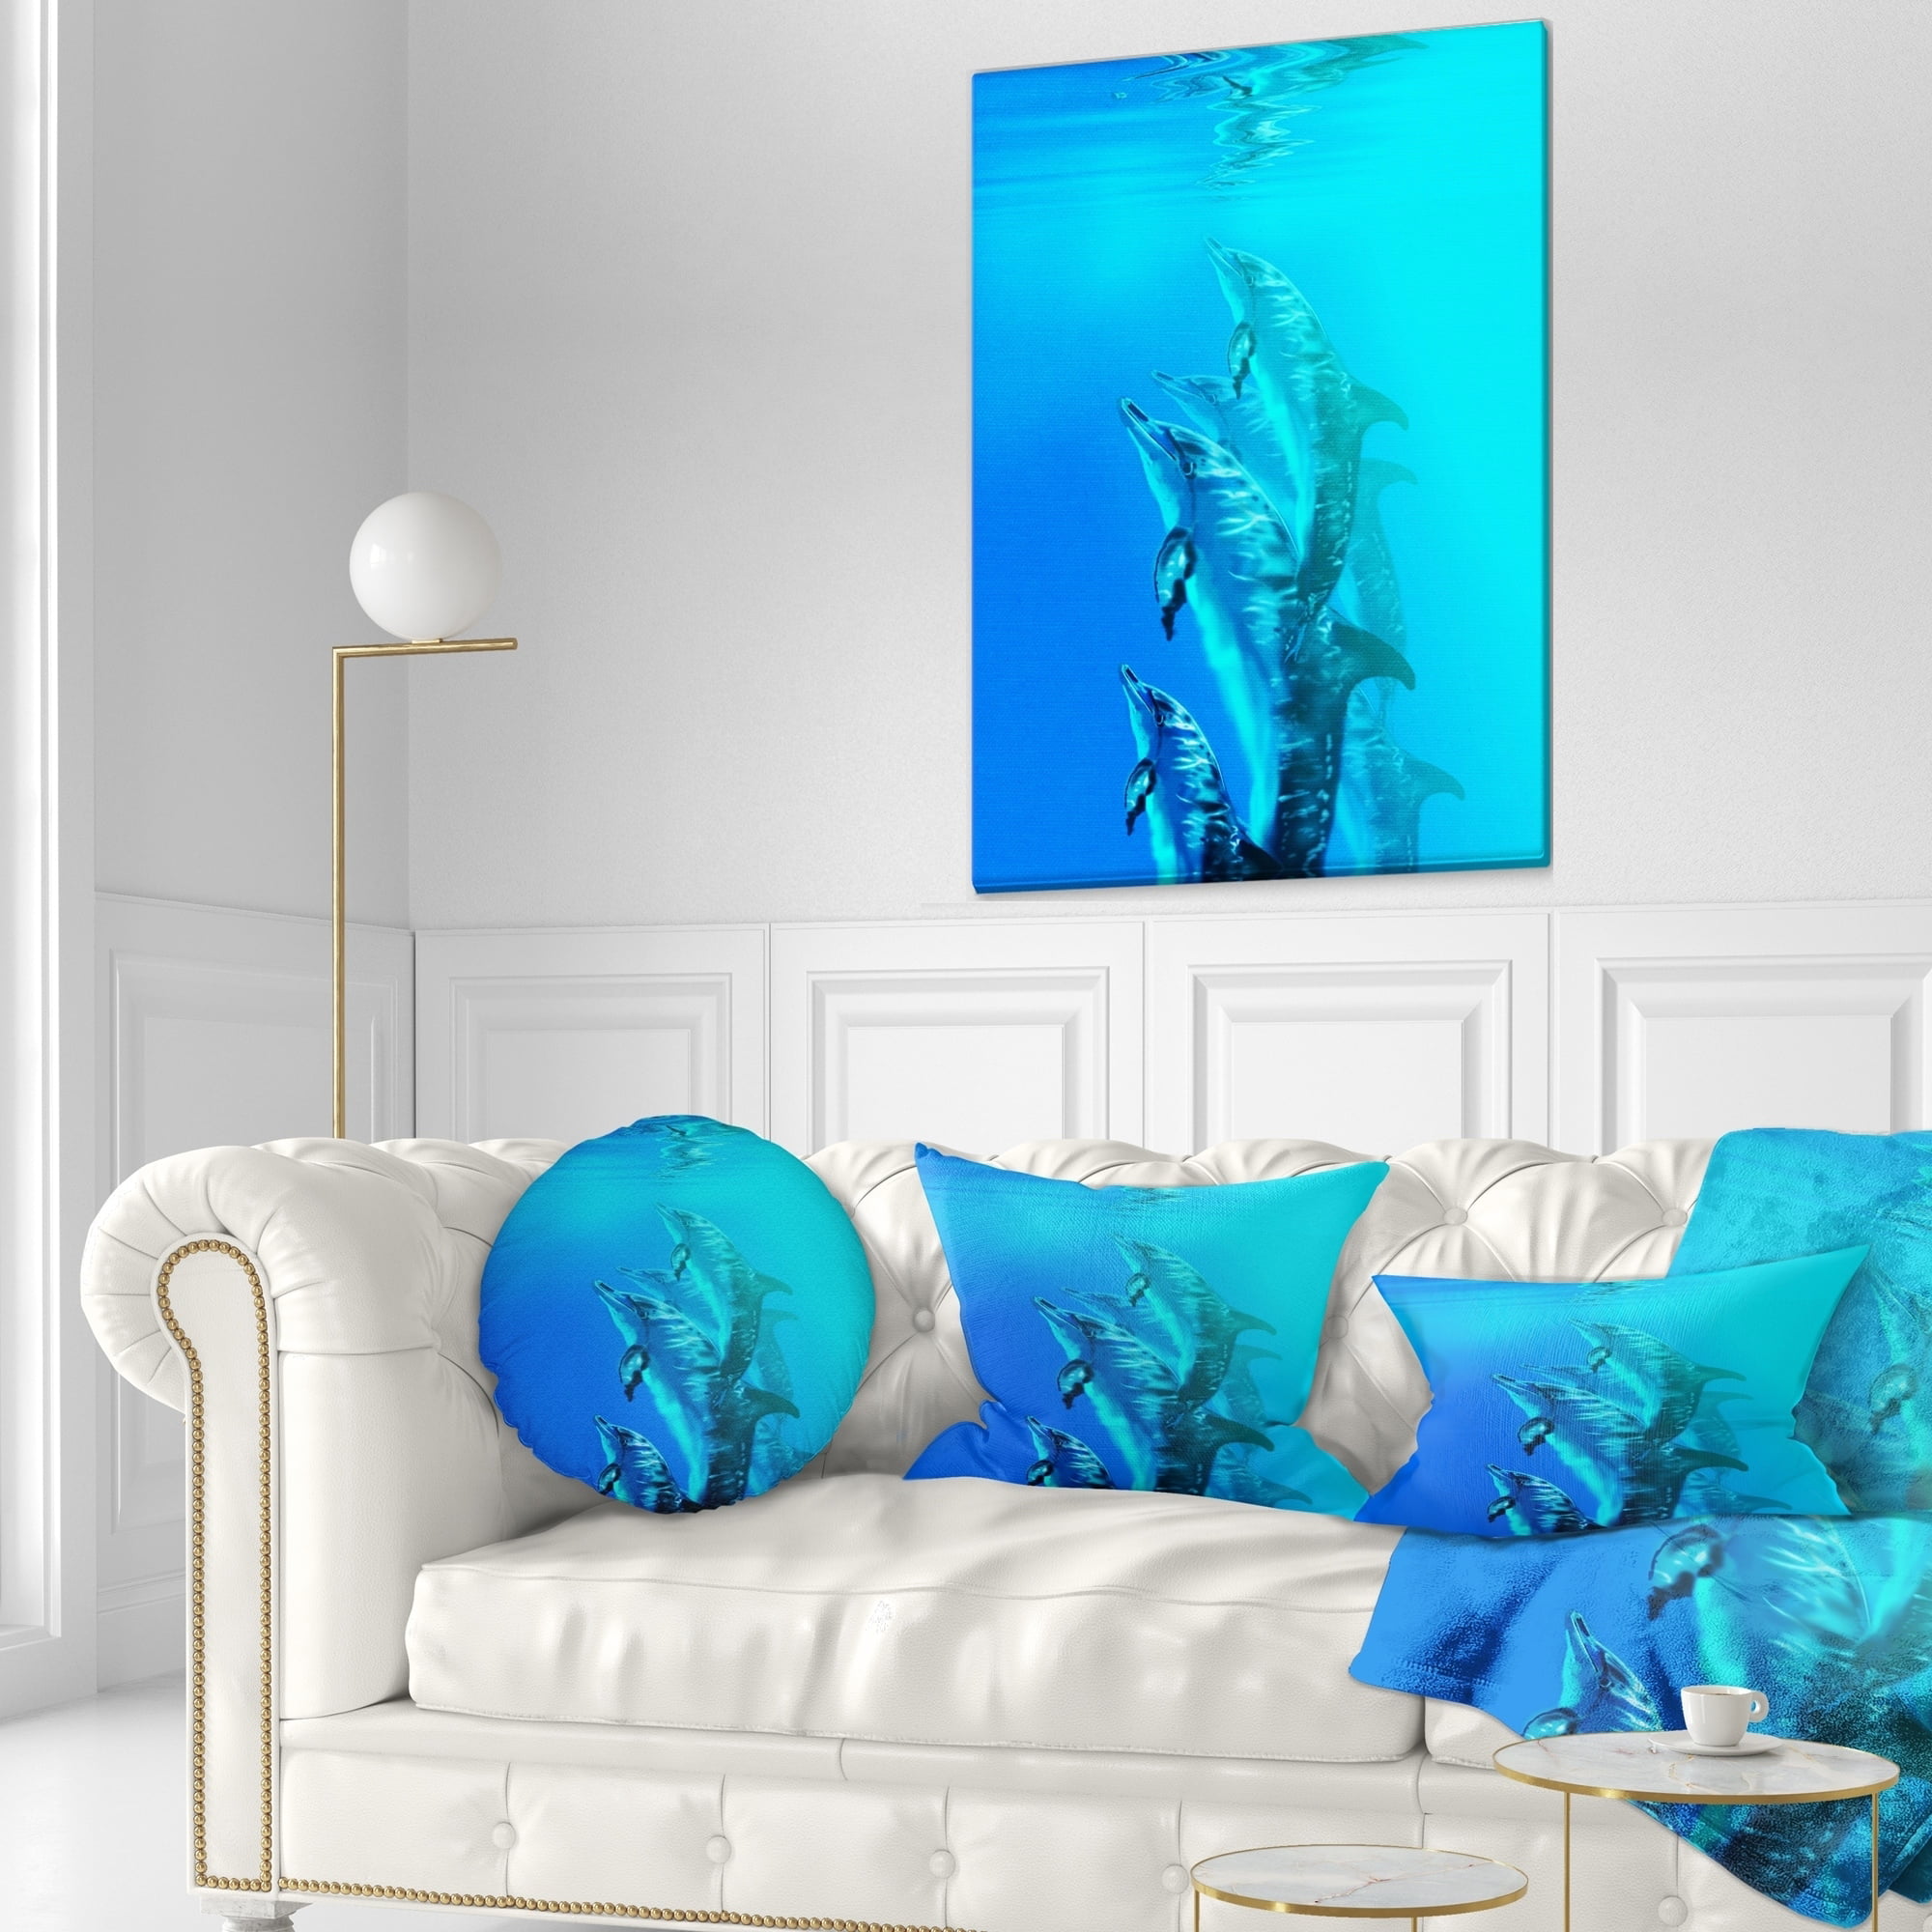 Insert Printed On Both Side Sofa Throw Pillow 16 Designart CU7473-16-16-C Dolphin in Blue Sea Seascape Round Cushion Cover for Living Room 